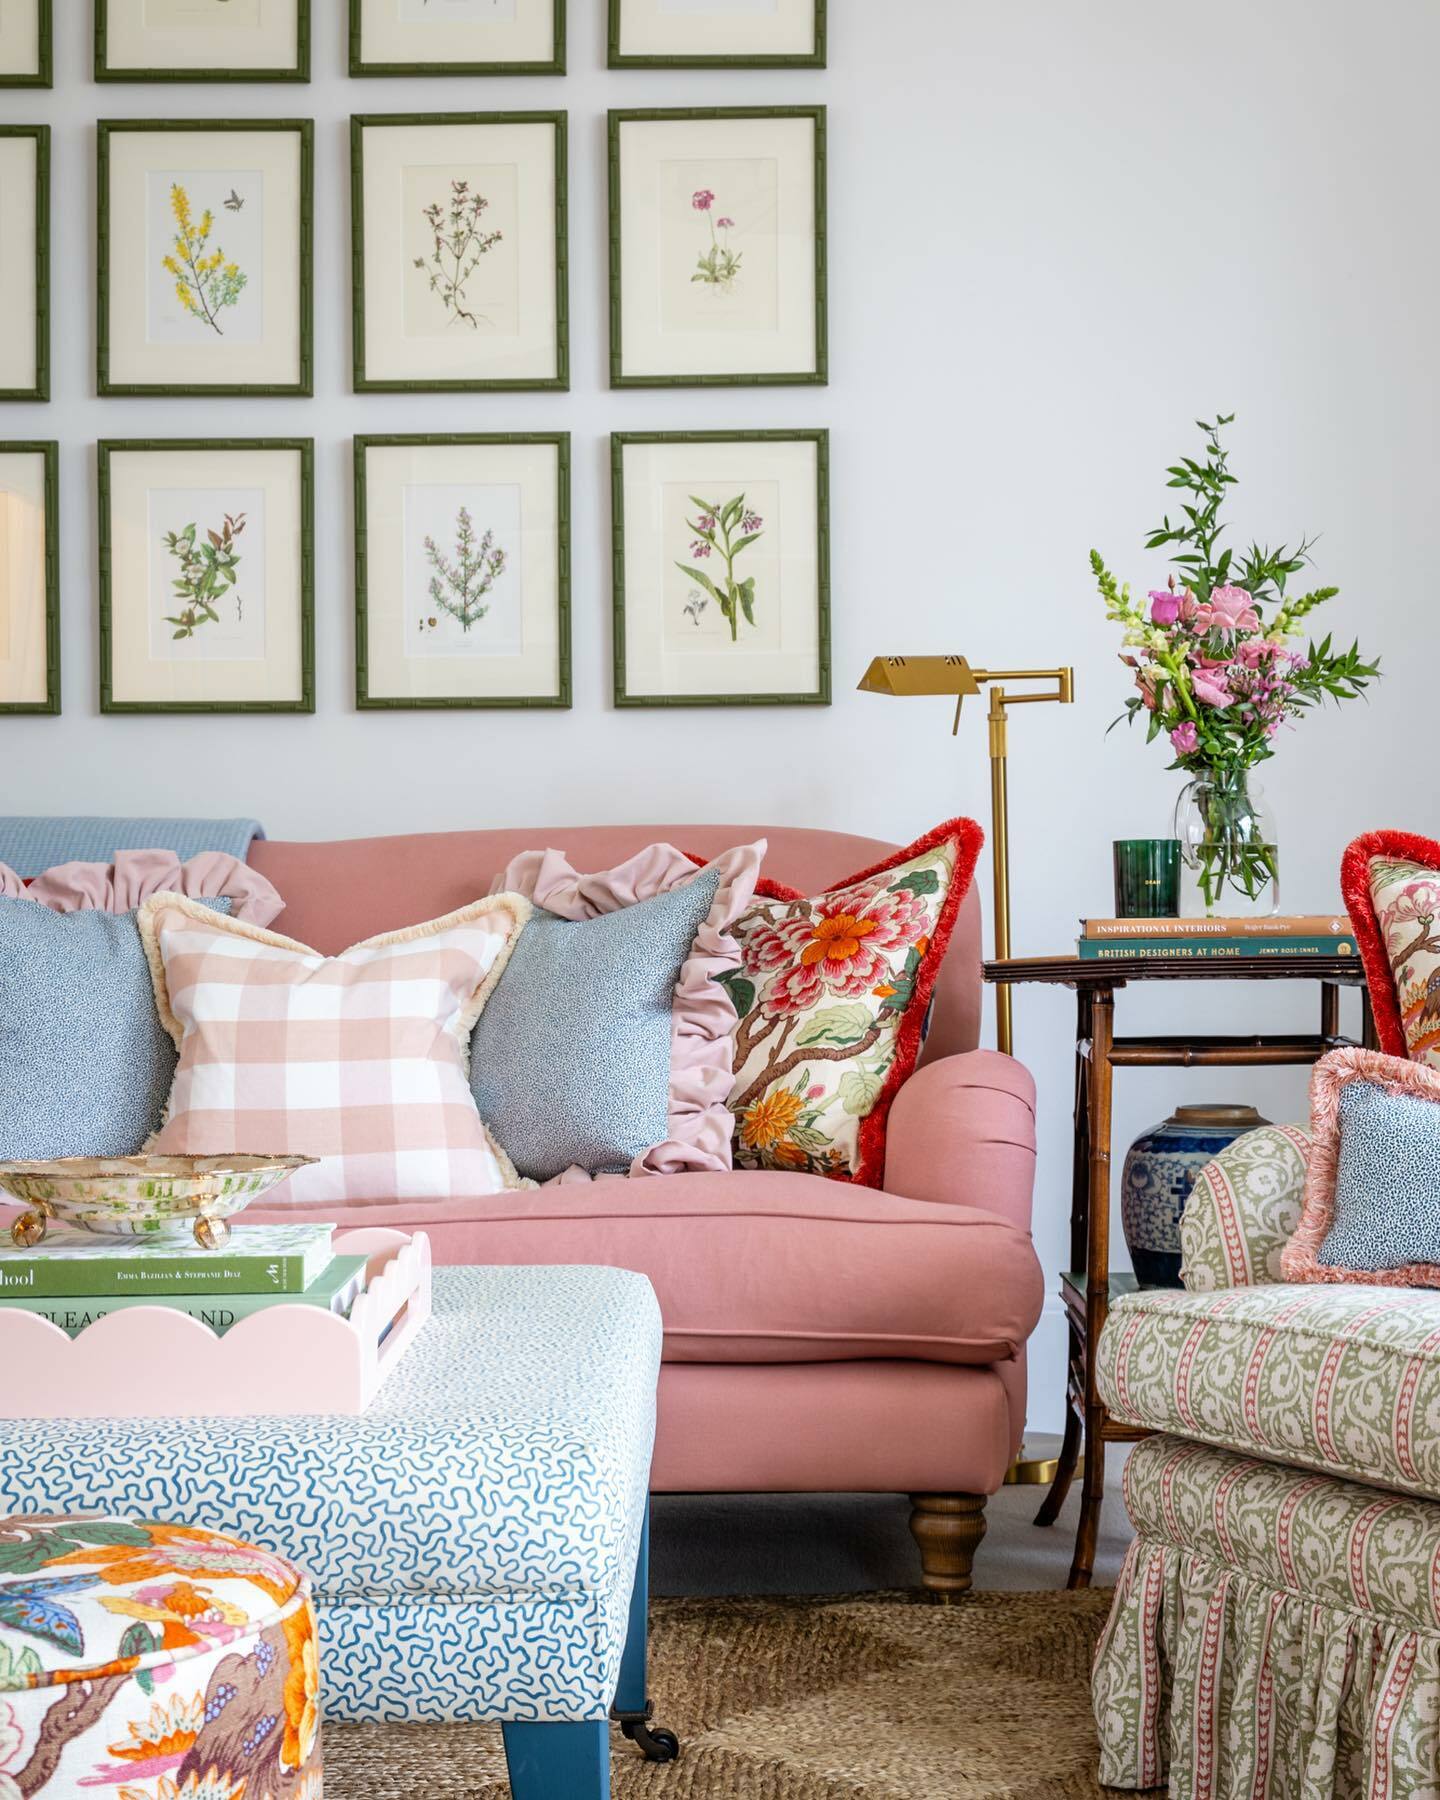 A traditional living room with pink and blue furniture and decorative throw pillows, creating a vibrant and colorful ambiance.